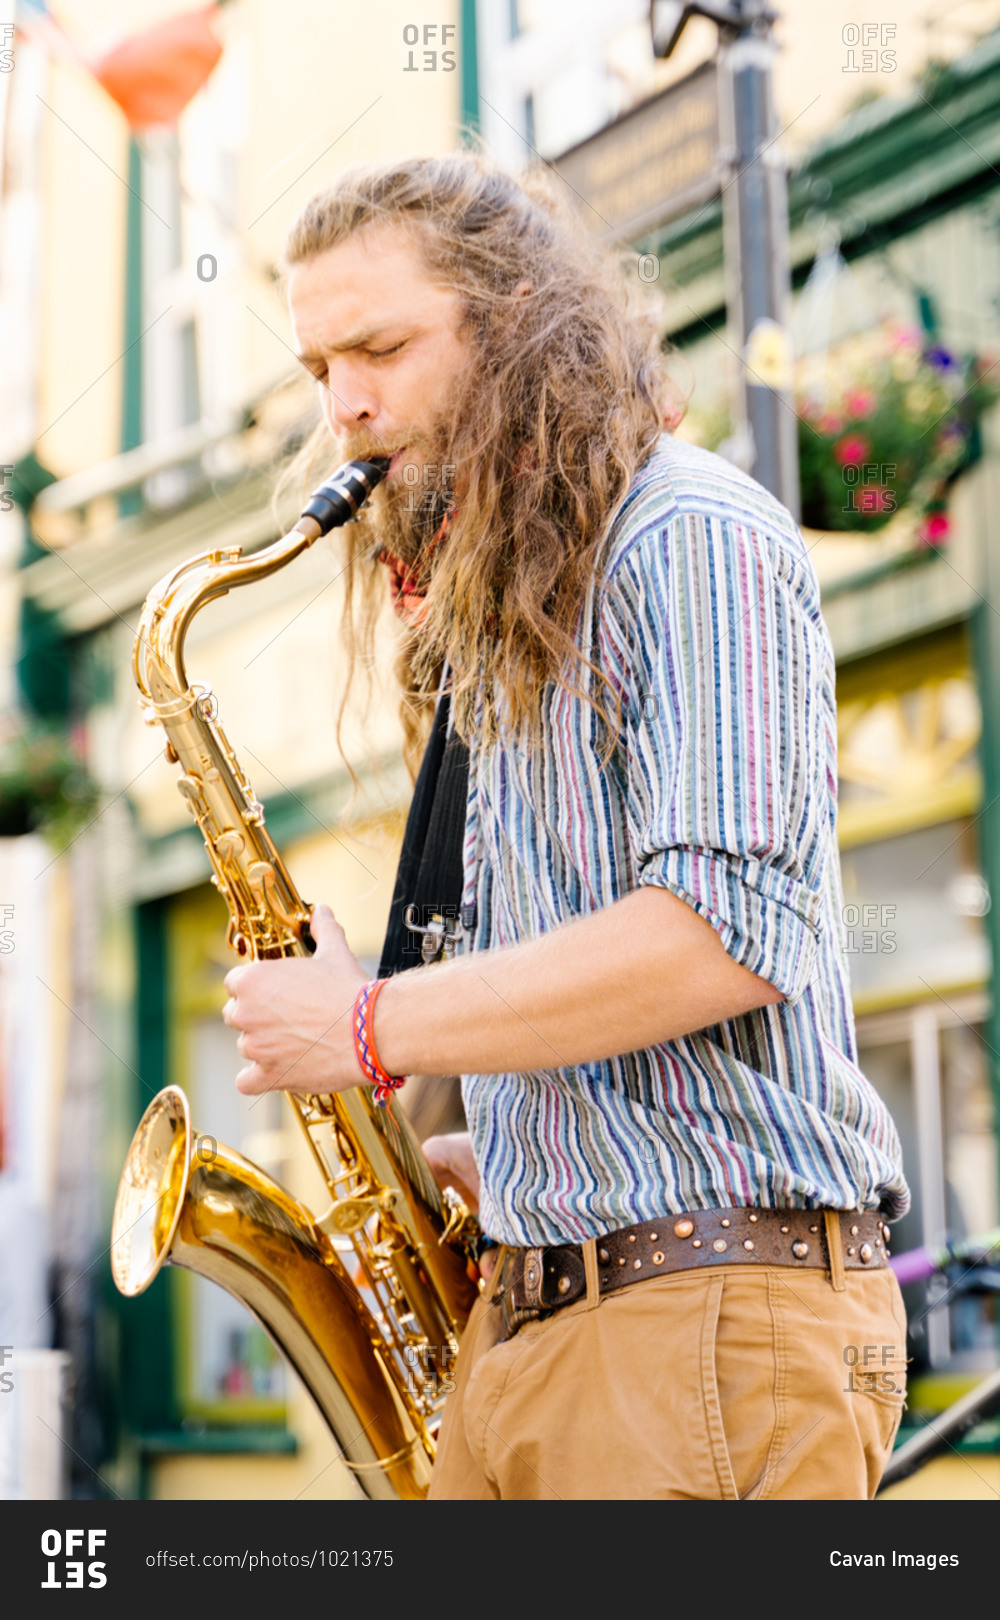 Vertical photo of a young man with long hair playing saxophone in the street